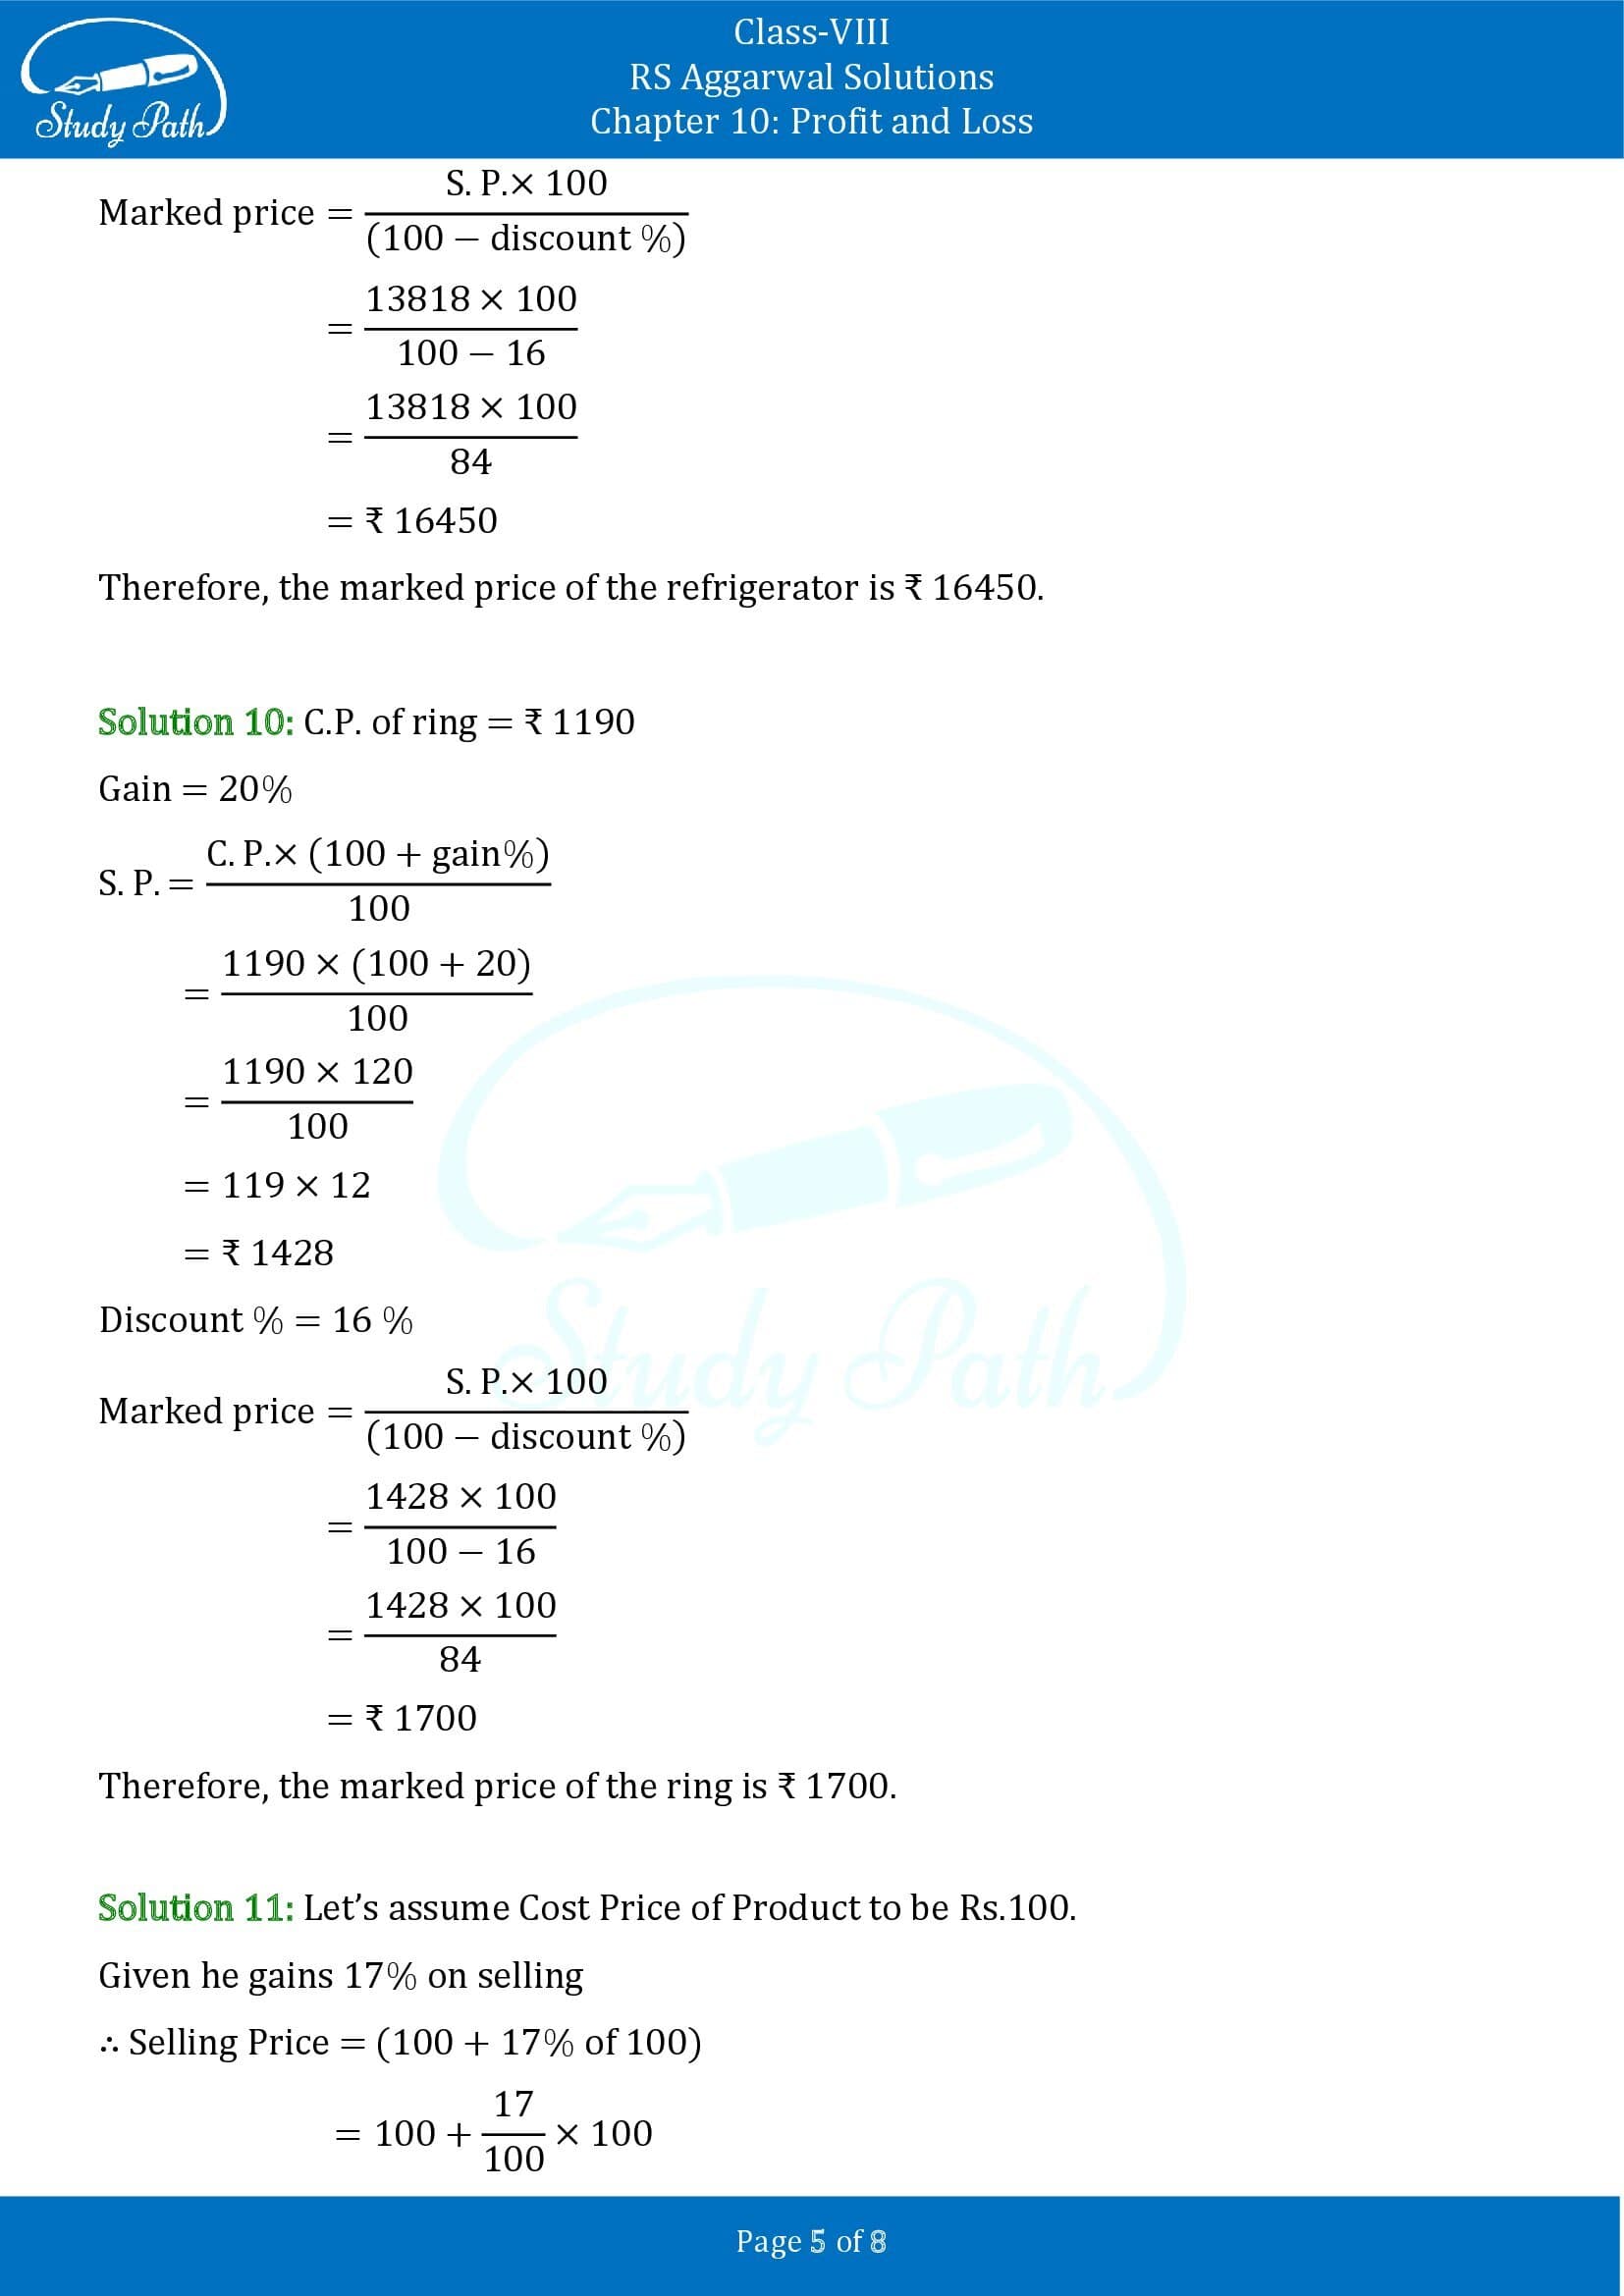 RS Aggarwal Solutions Class 8 Chapter 10 Profit and Loss Exercise 10B 00005